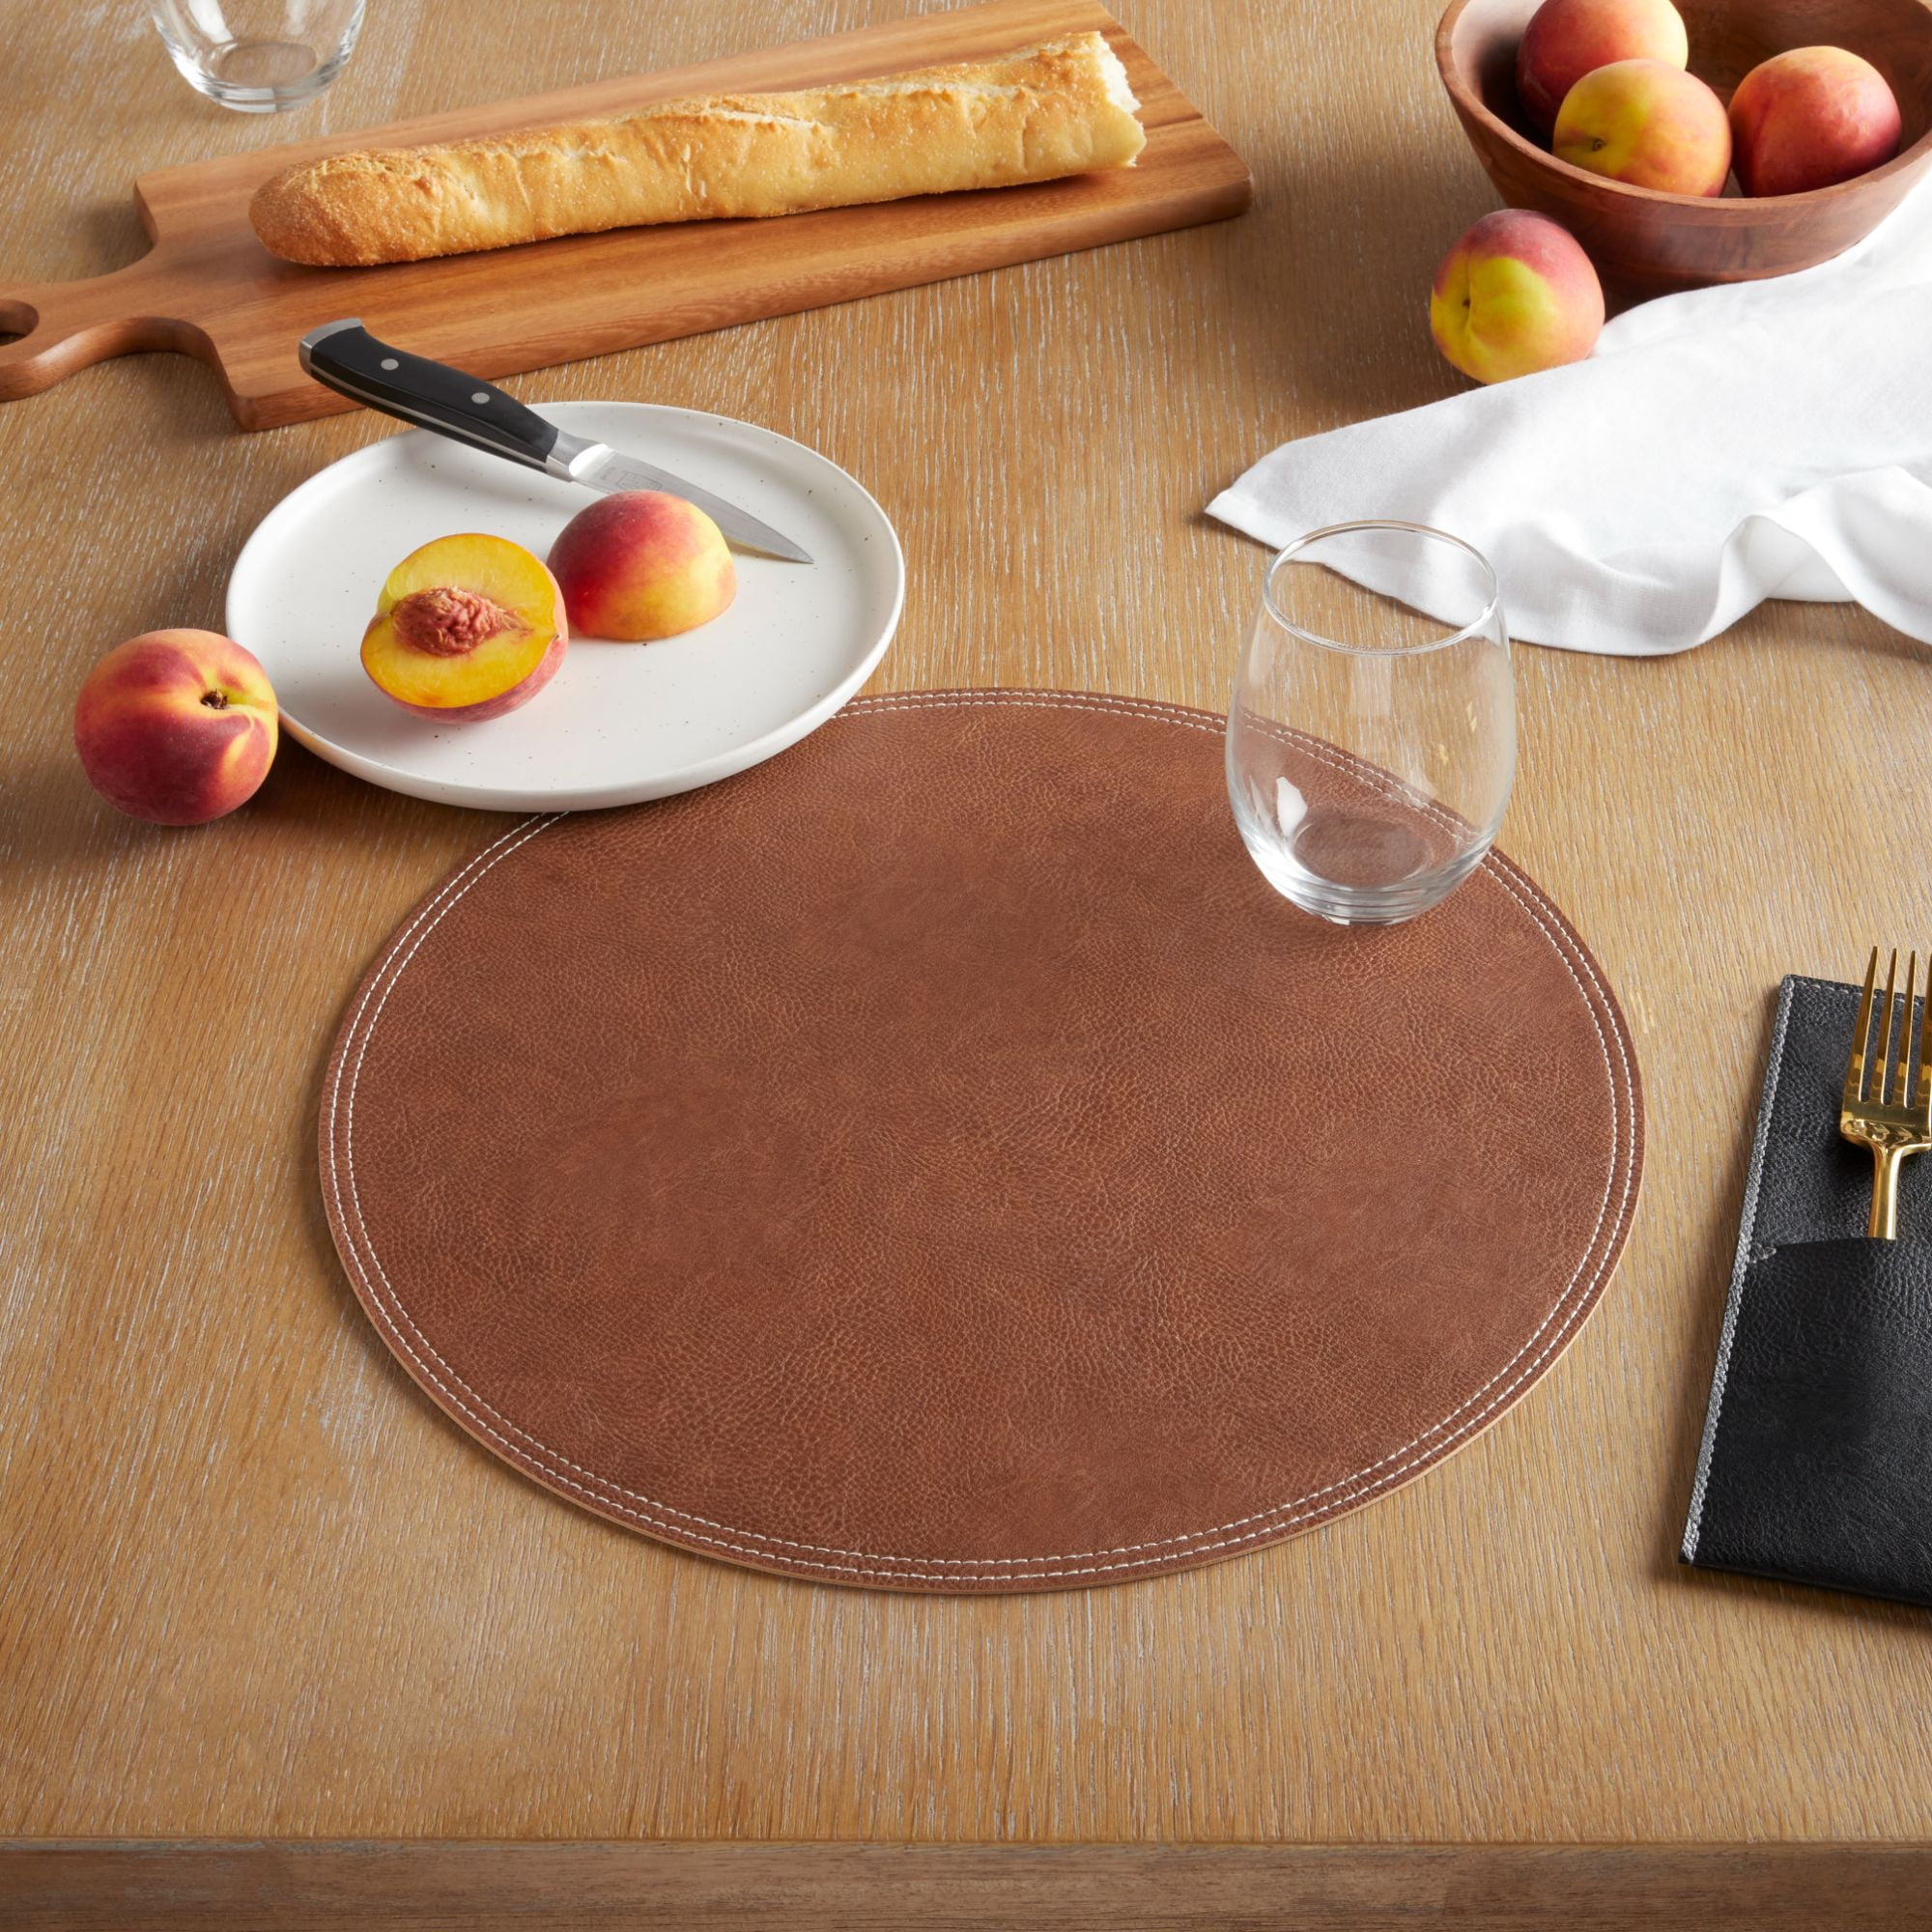 2 Pcs Luxury Leather Placemats Set Square Brown Thick & Heavy Premium  Quality Leather Table Decor Luxury Home Decor Foodie Chef Gift 